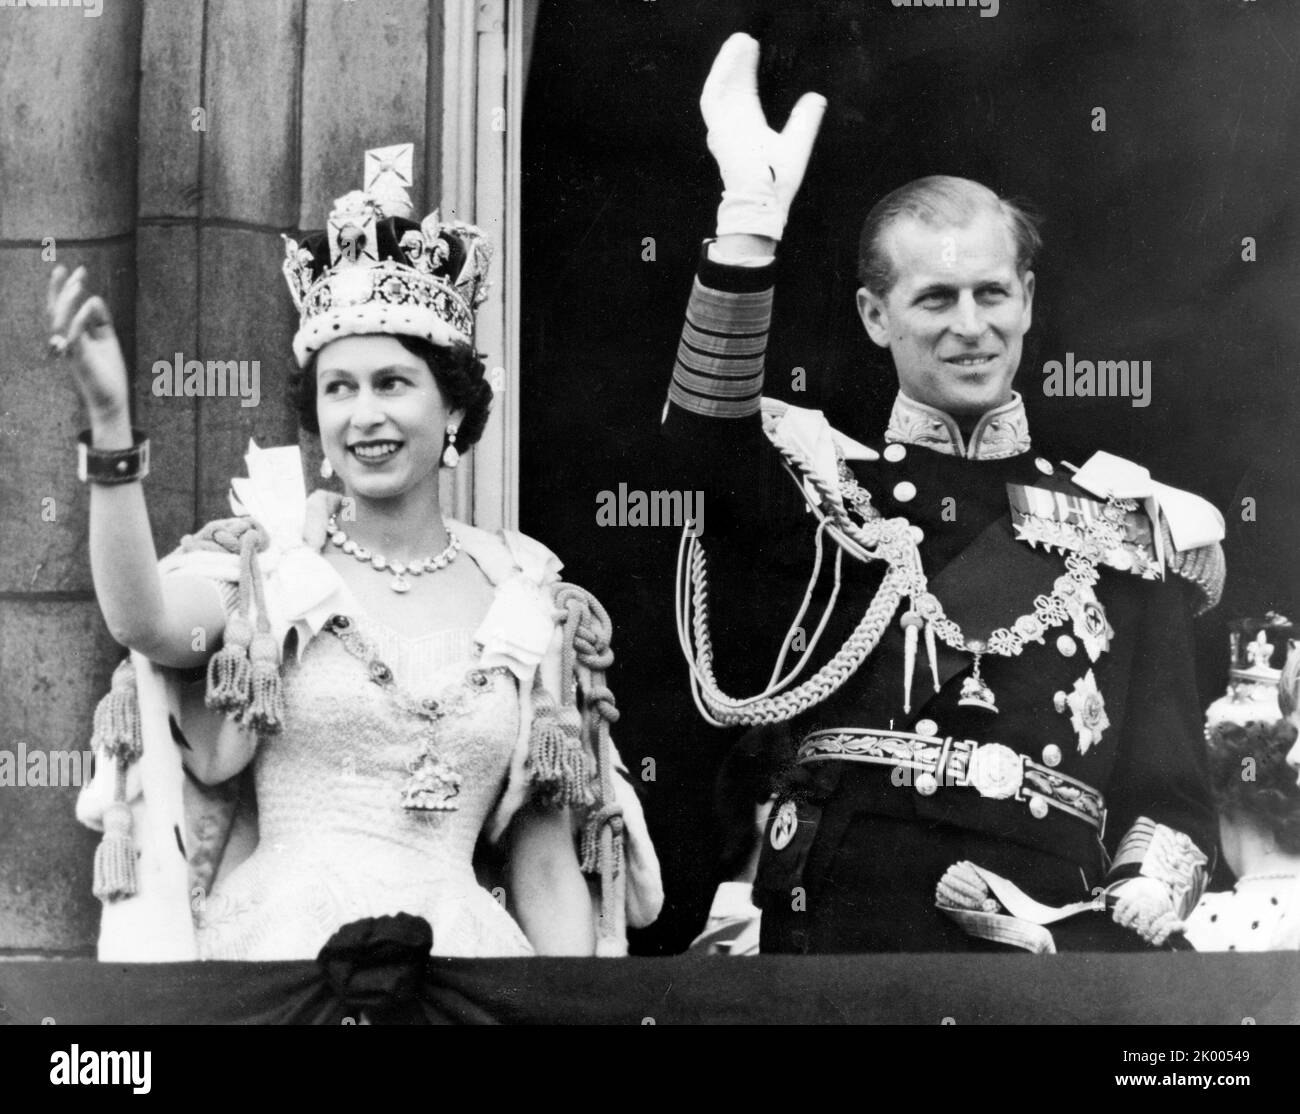 June 2, 1953 - London, England, U.K. - QUEEN ELIZABETH II has been crowned at a coronation ceremony in Westminster Abbey in London. In front of more than 8,000 guests, including prime ministers and heads of state from around the Commonwealth, she took the Coronation Oath and is now bound to serve her people. PICTURED: Elizabeth II and PRINCE PHILIP after the coronation. (Credit Image: © Keystone Press Agency/ZUMA Press Wire) Stock Photo